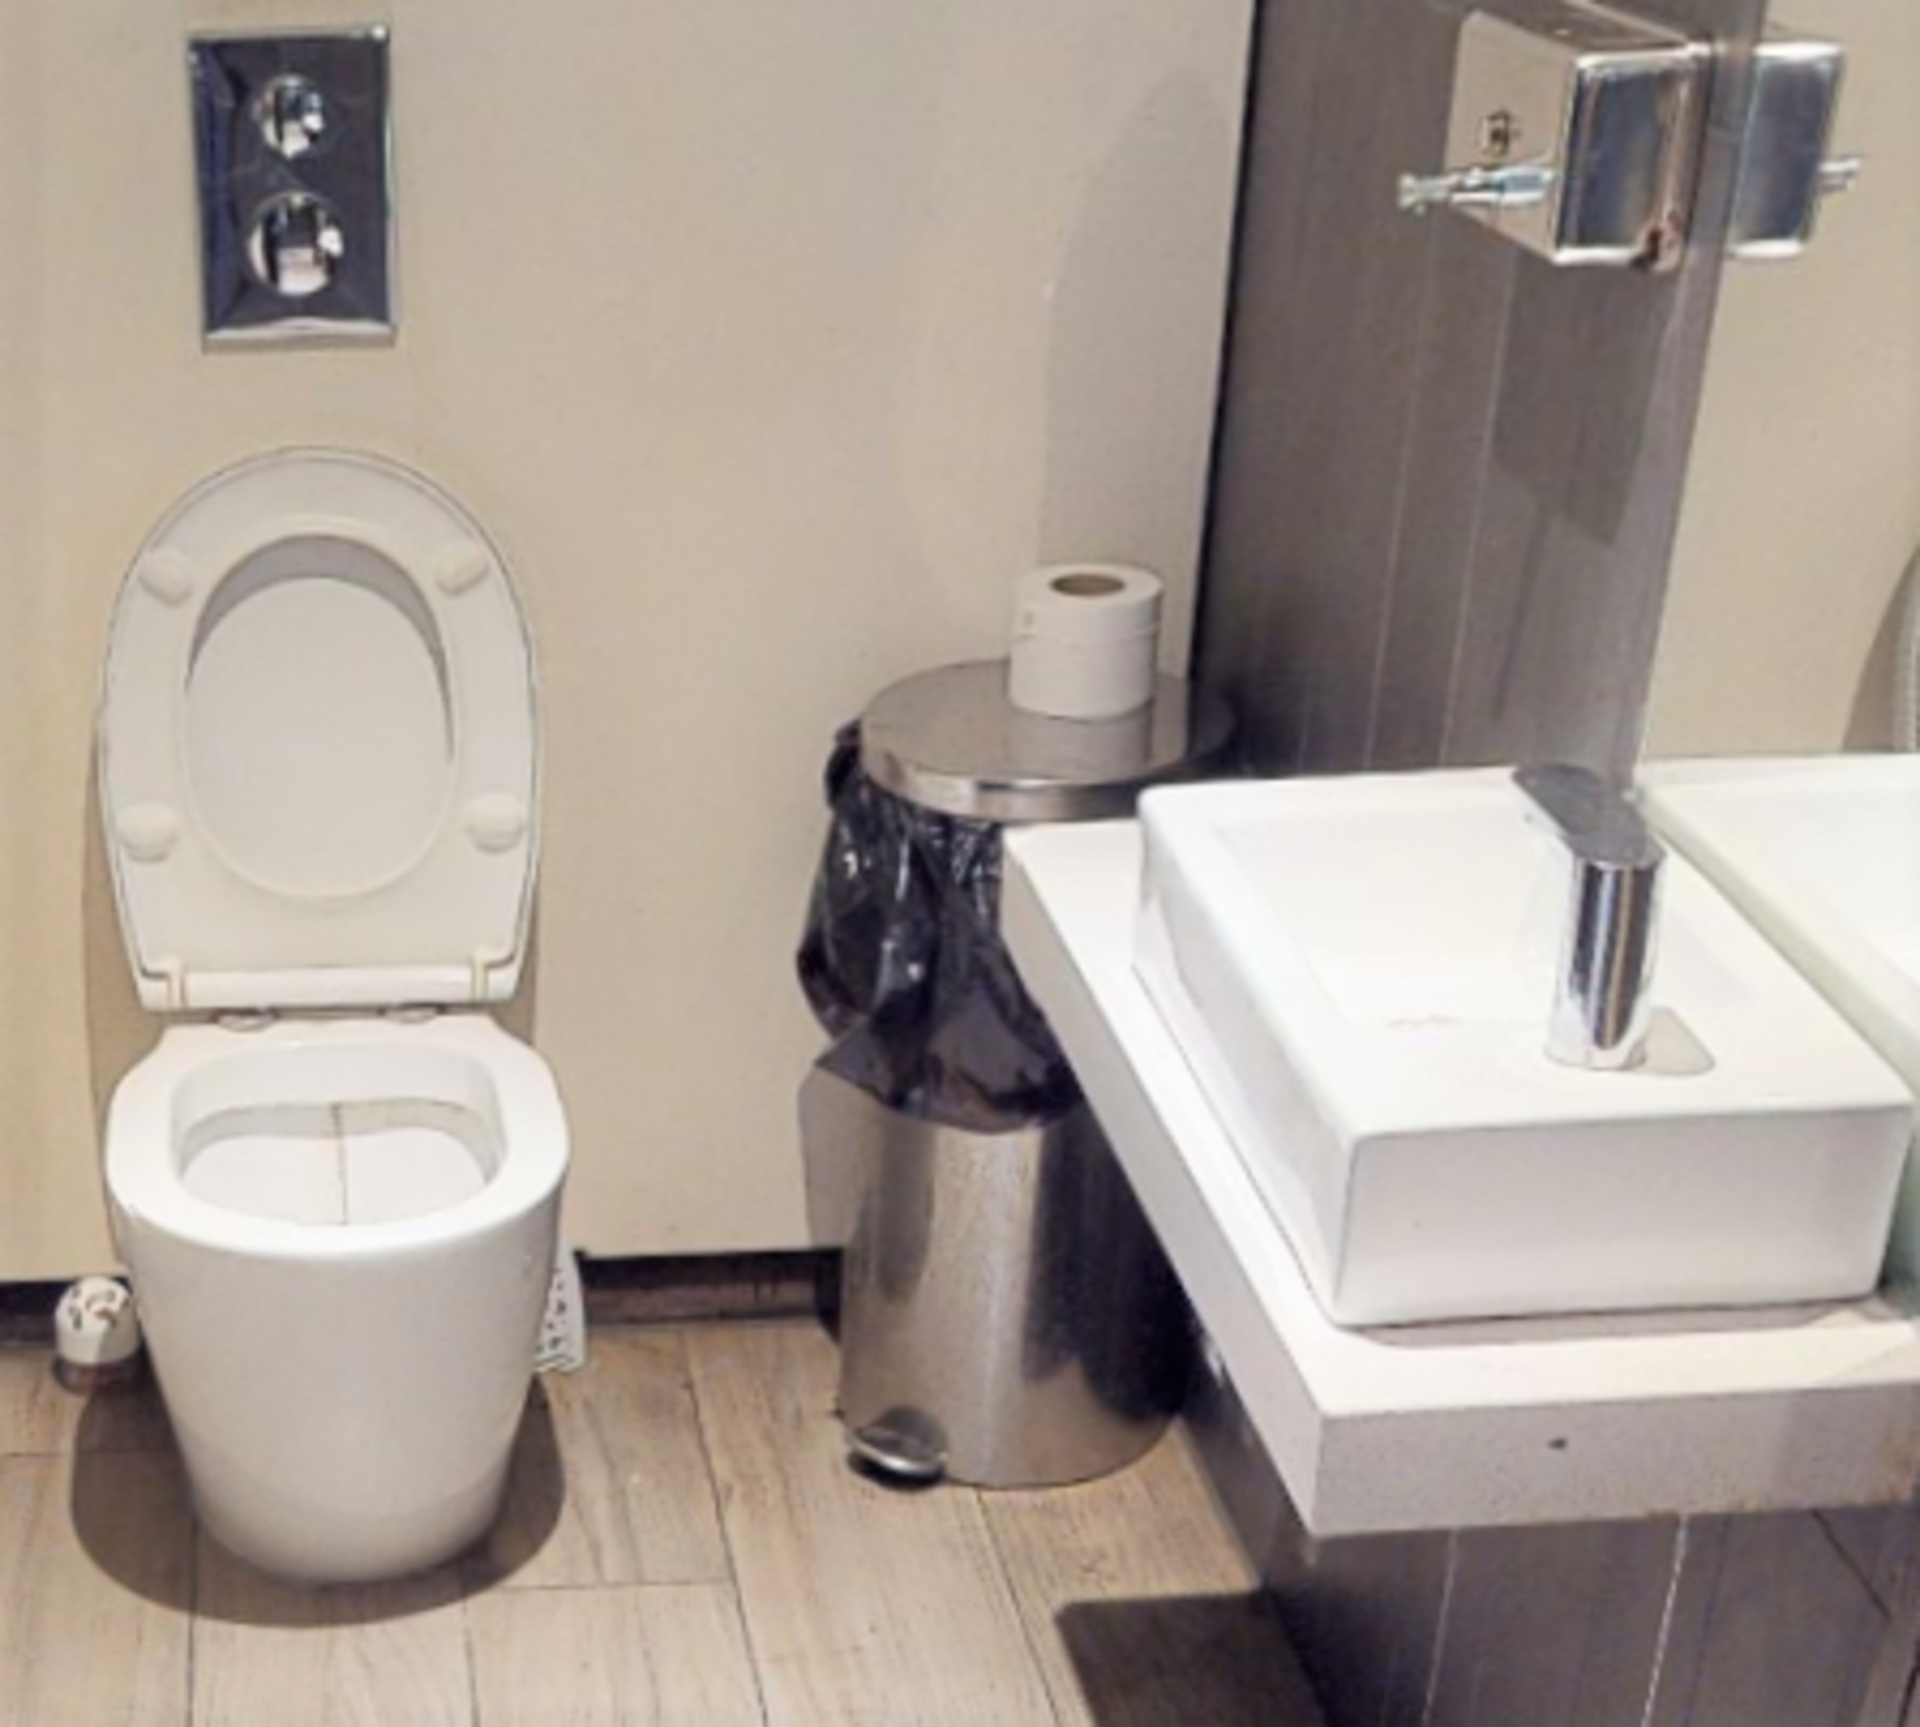 1 x Toilet Suite - Includes Back to Wall Toilet, Floating Hand Wash Basin With Mixer Tap, Pedal Bin, - Image 2 of 2